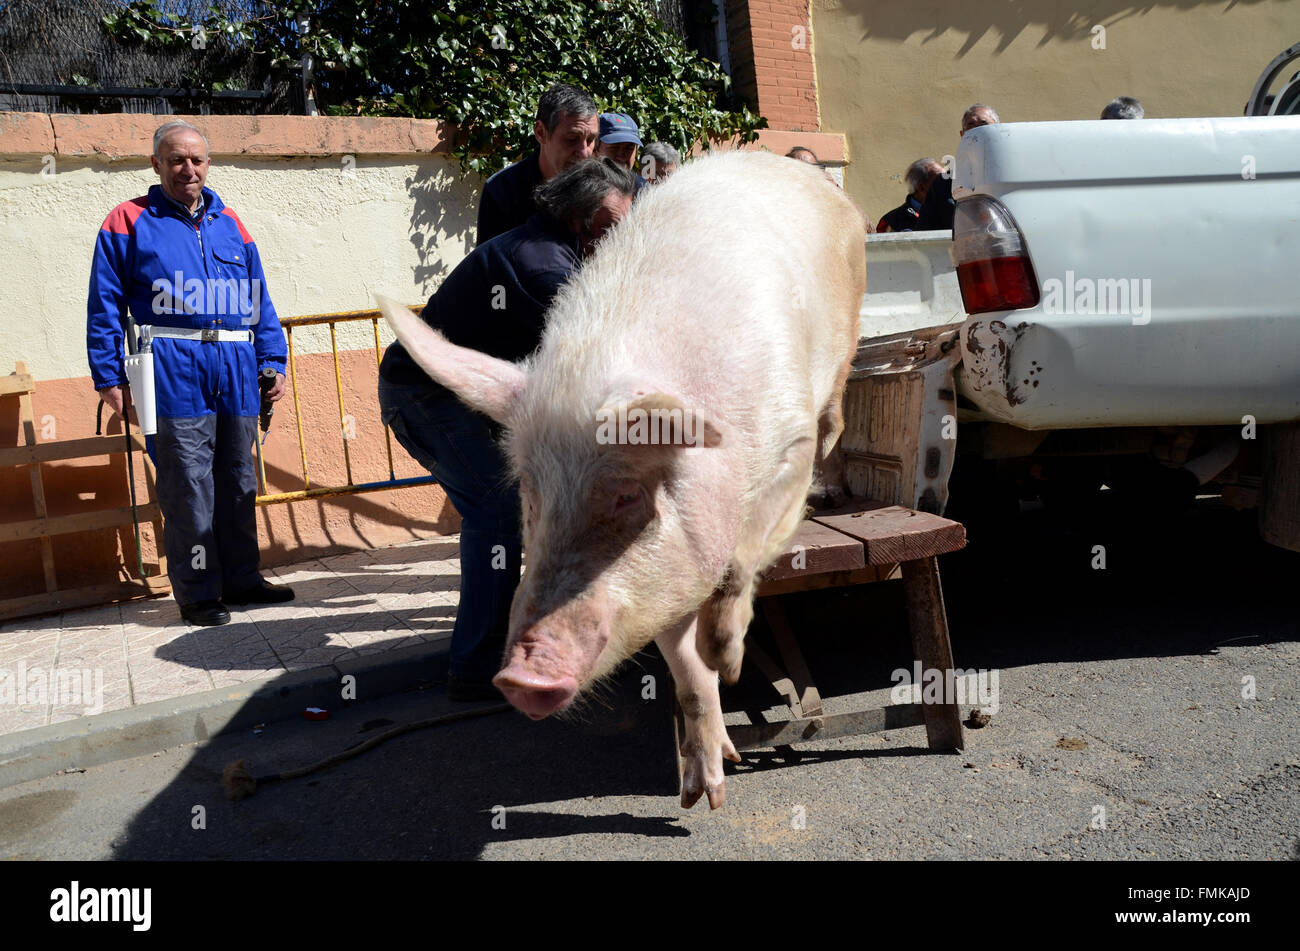 Arcos de Jalón, Spain. 12th Mar, 2016. A pig being transported on a car  trailer to be sacrificed during the celebration of 'La matanza' in Arcos de  Jalón, north of Spain. Credit: